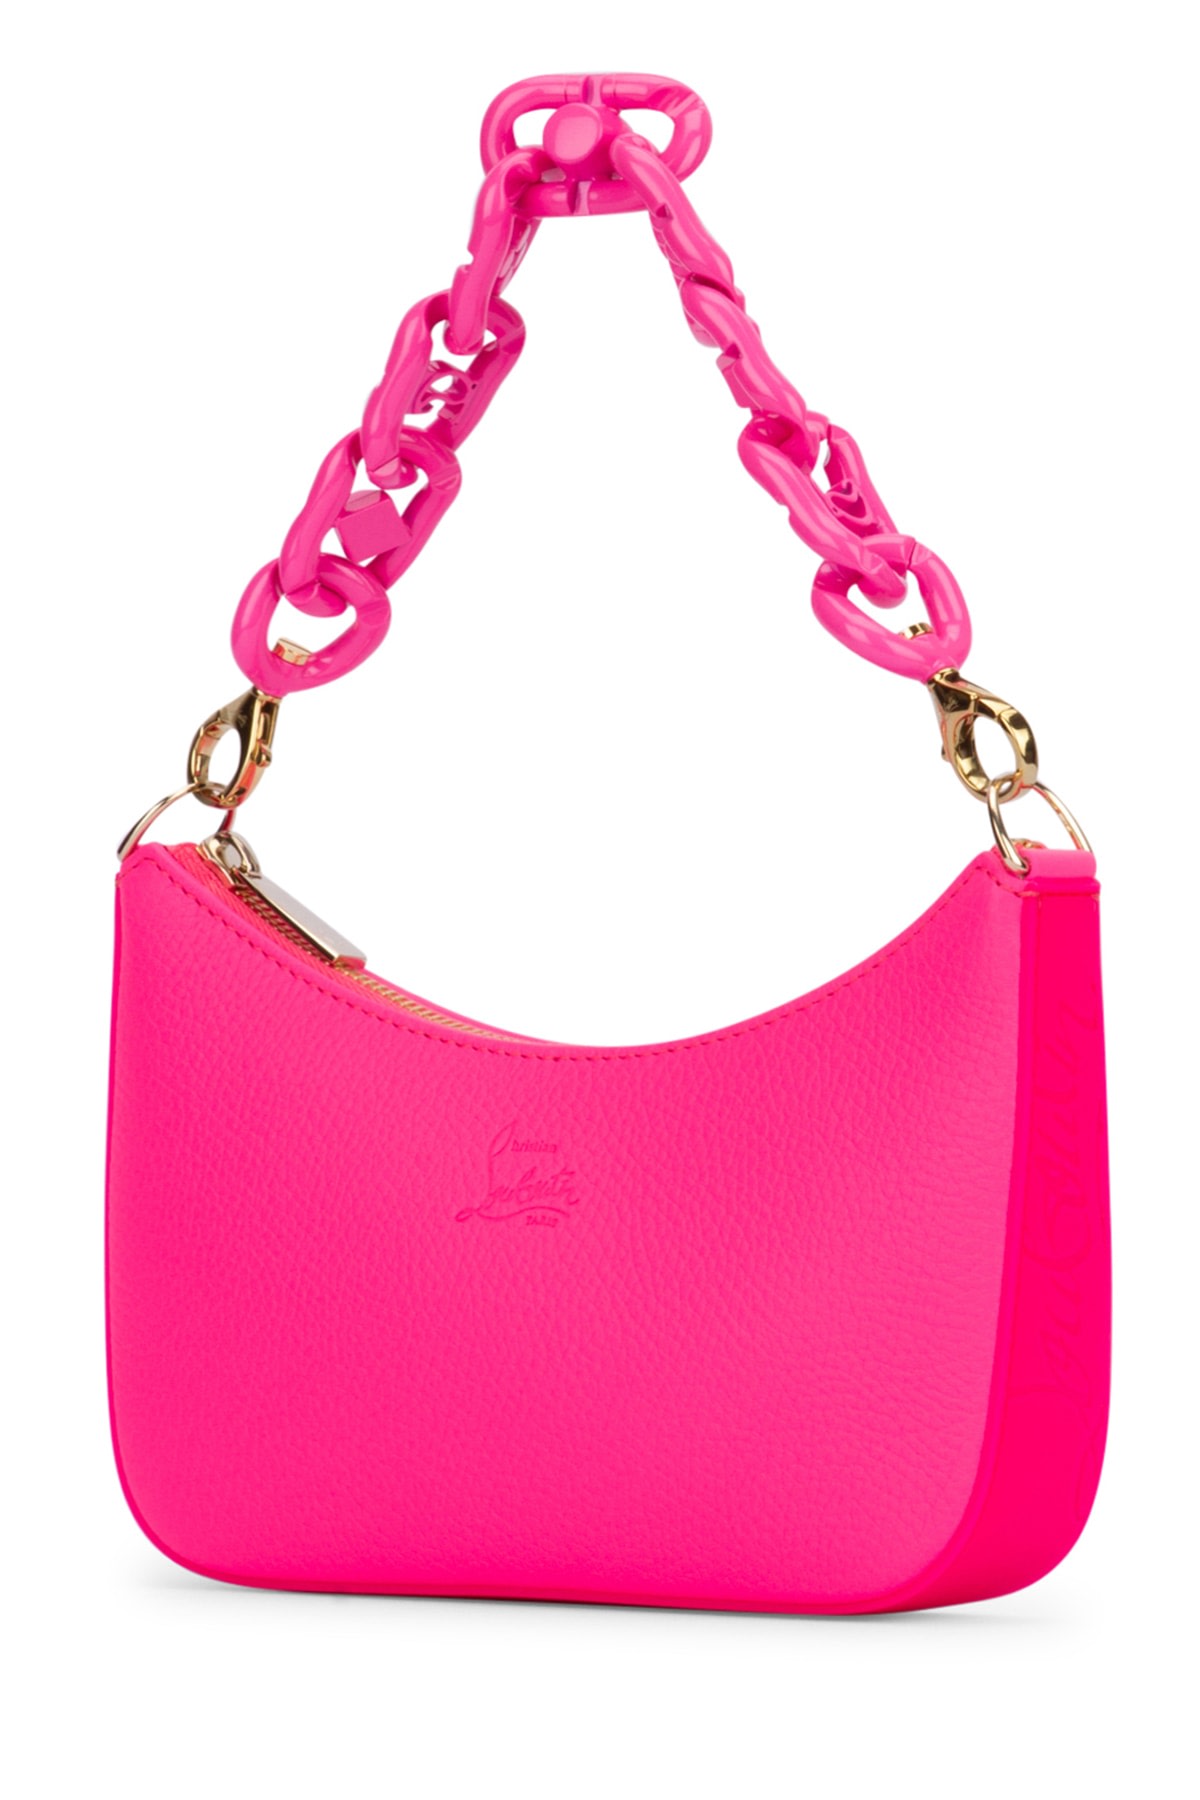 Christian Louboutin Clutch In Pink